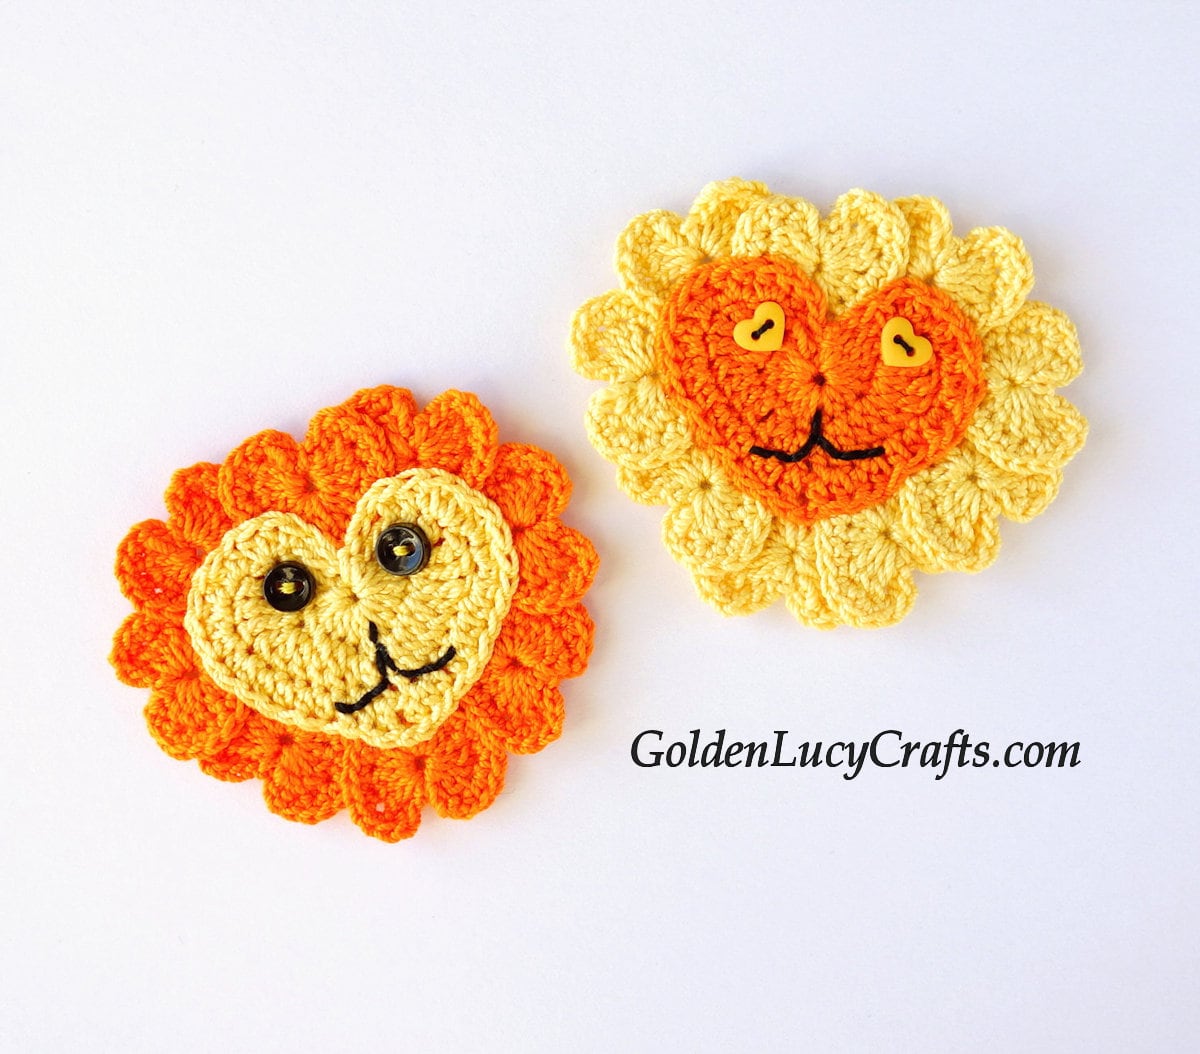 Two crocheted heart lion appliques.